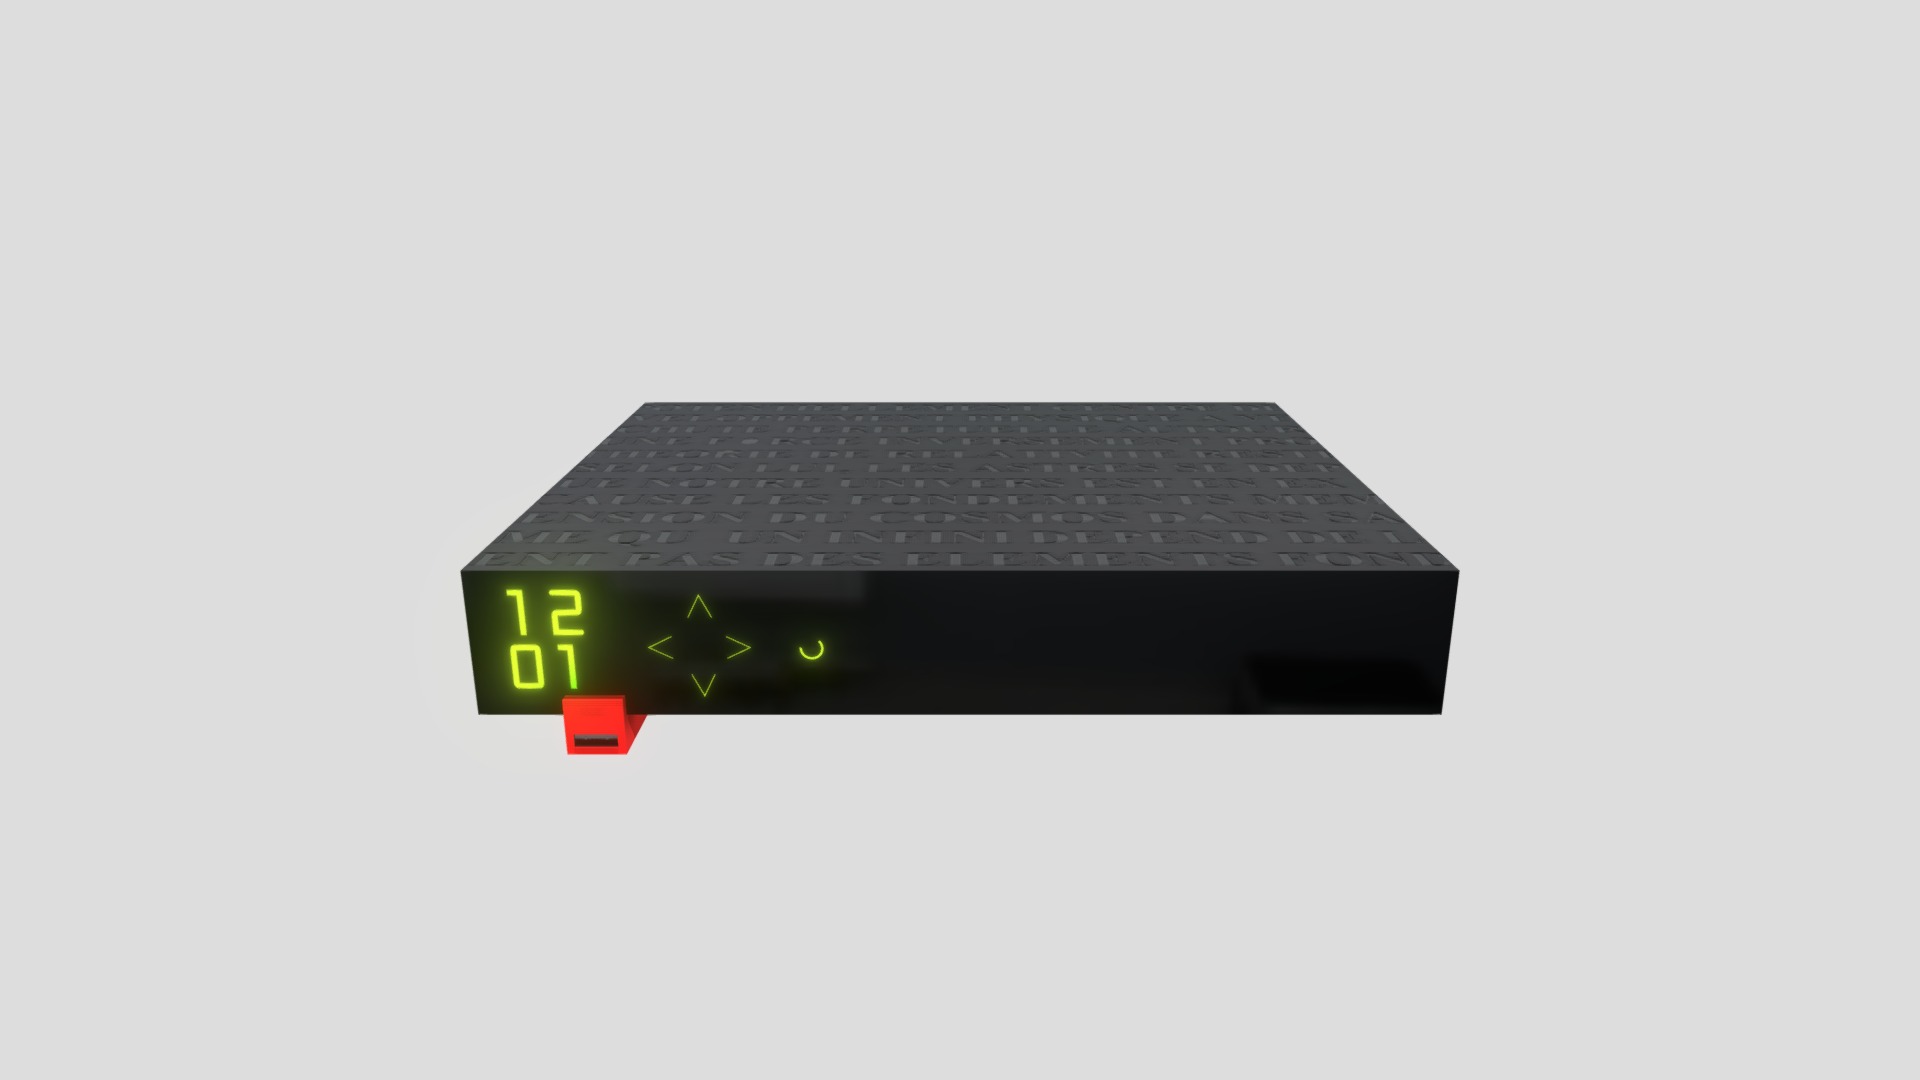 3D model Freebox Revolution - This is a 3D model of the Freebox Revolution. The 3D model is about a black rectangular object with green lights.